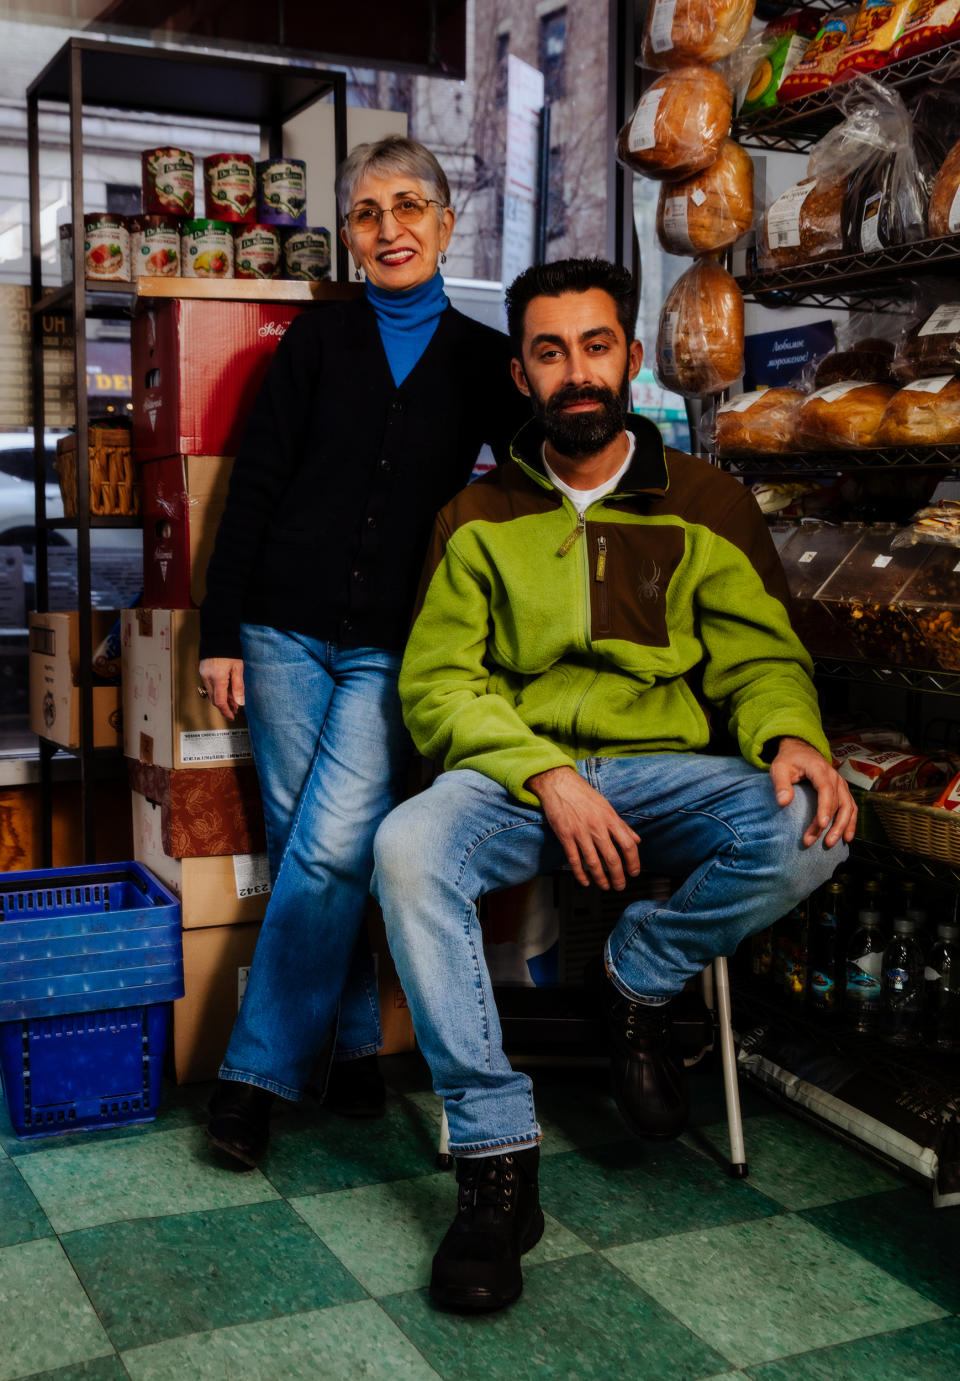 Image: Gleb Gavrilov, right, and his mother, Marina, at their store. Marina worked at the store for years before she bought the business. (Justin J Wee for NBC News)